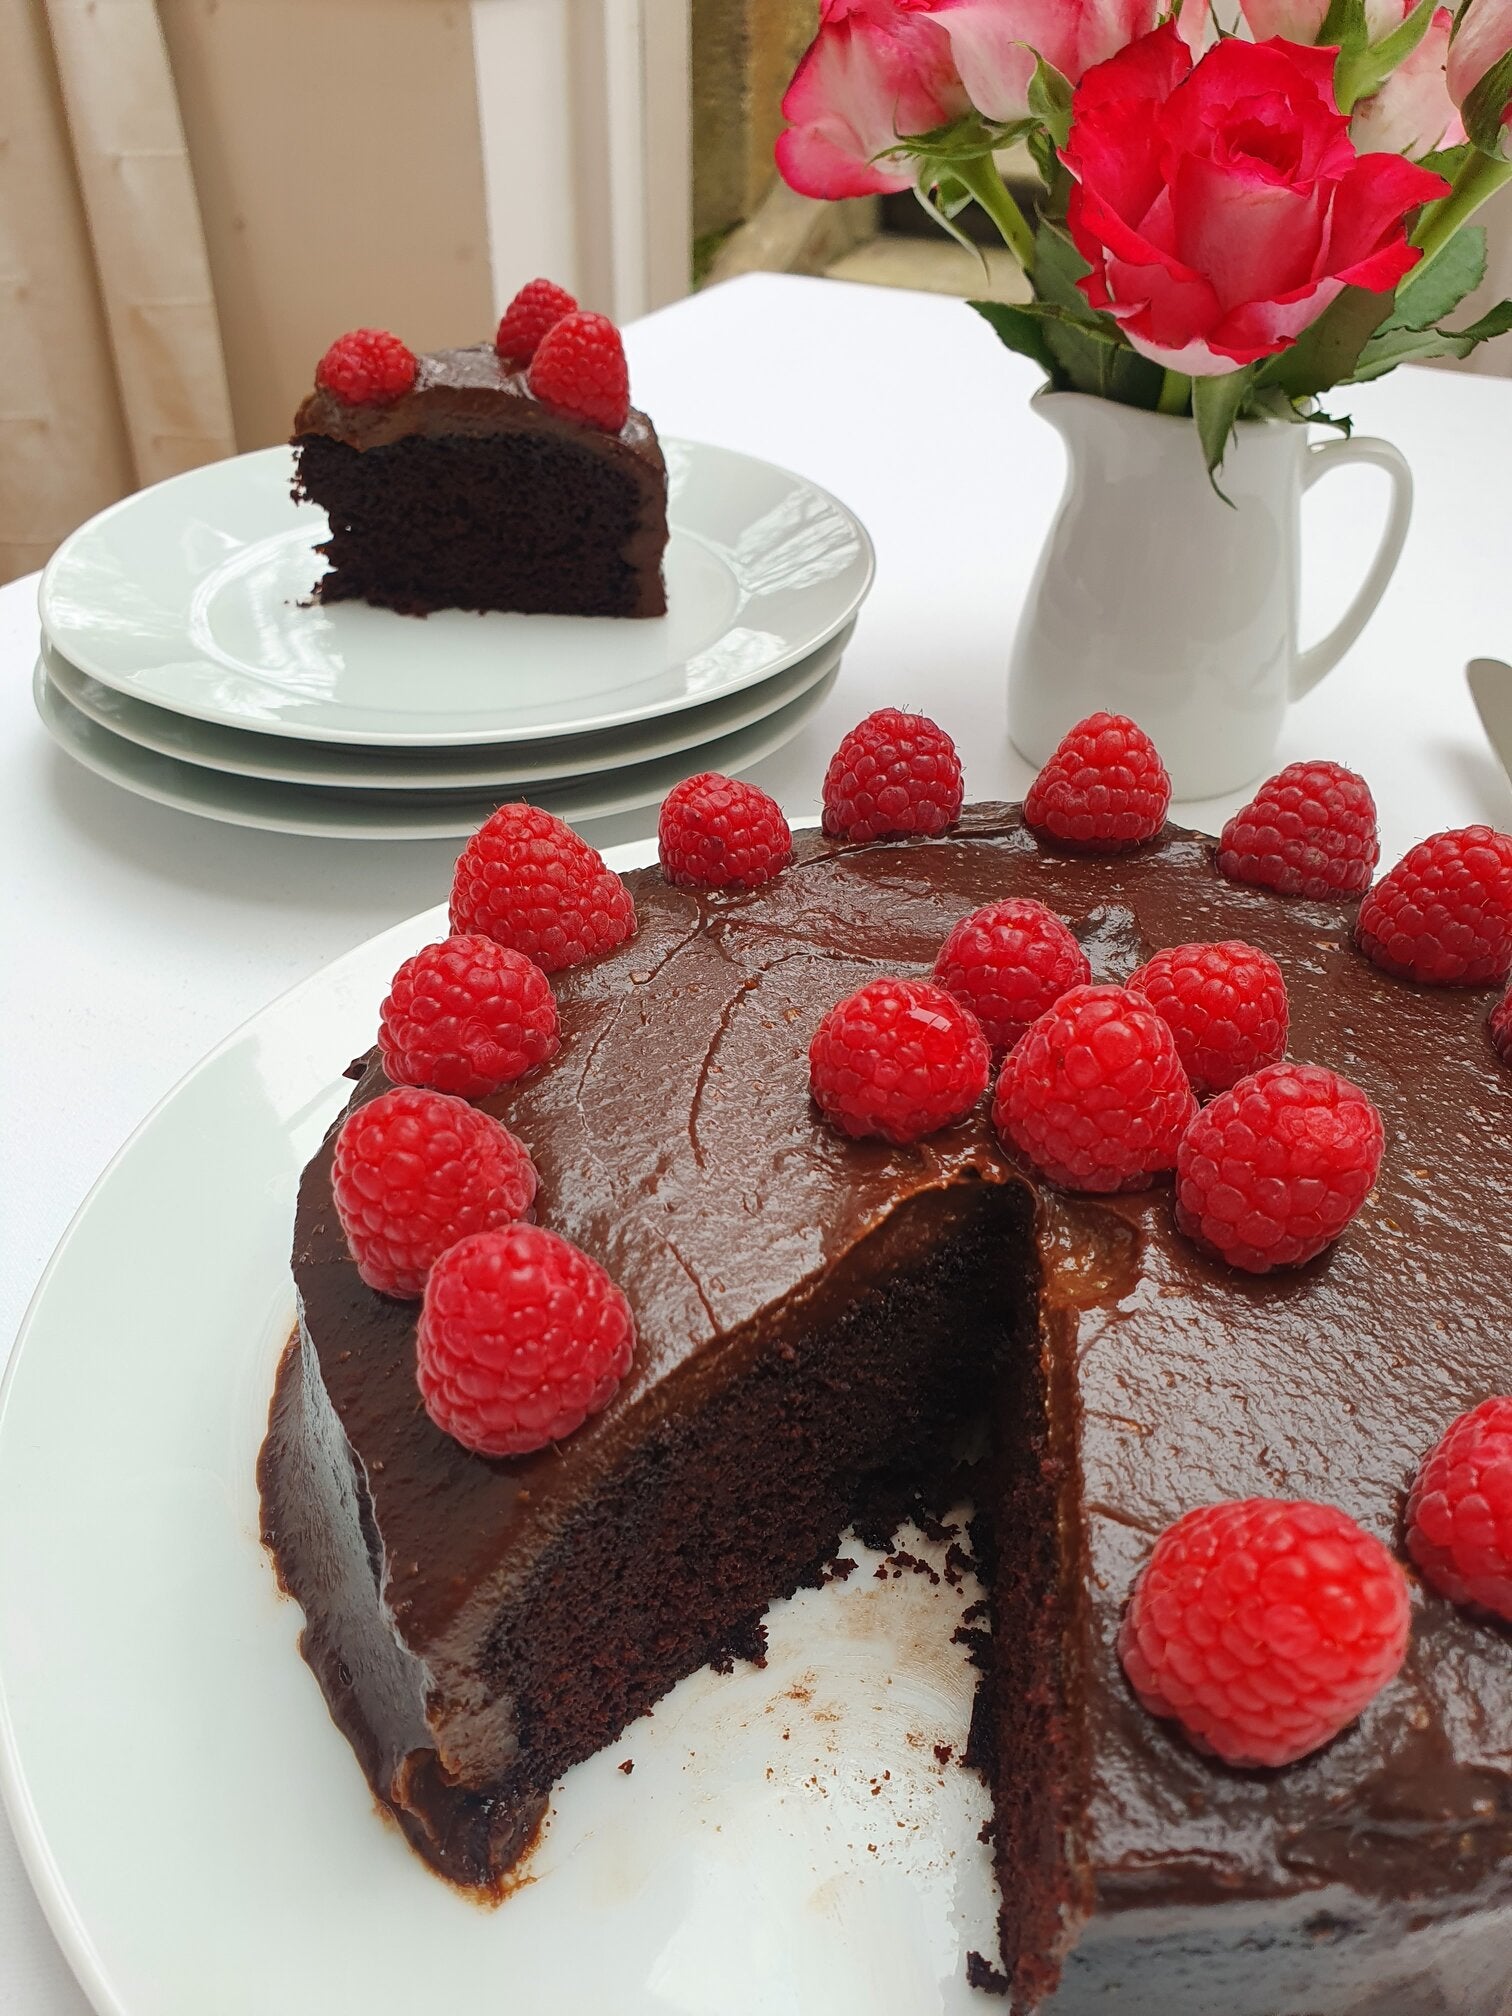 Chocolate and olive oil cake